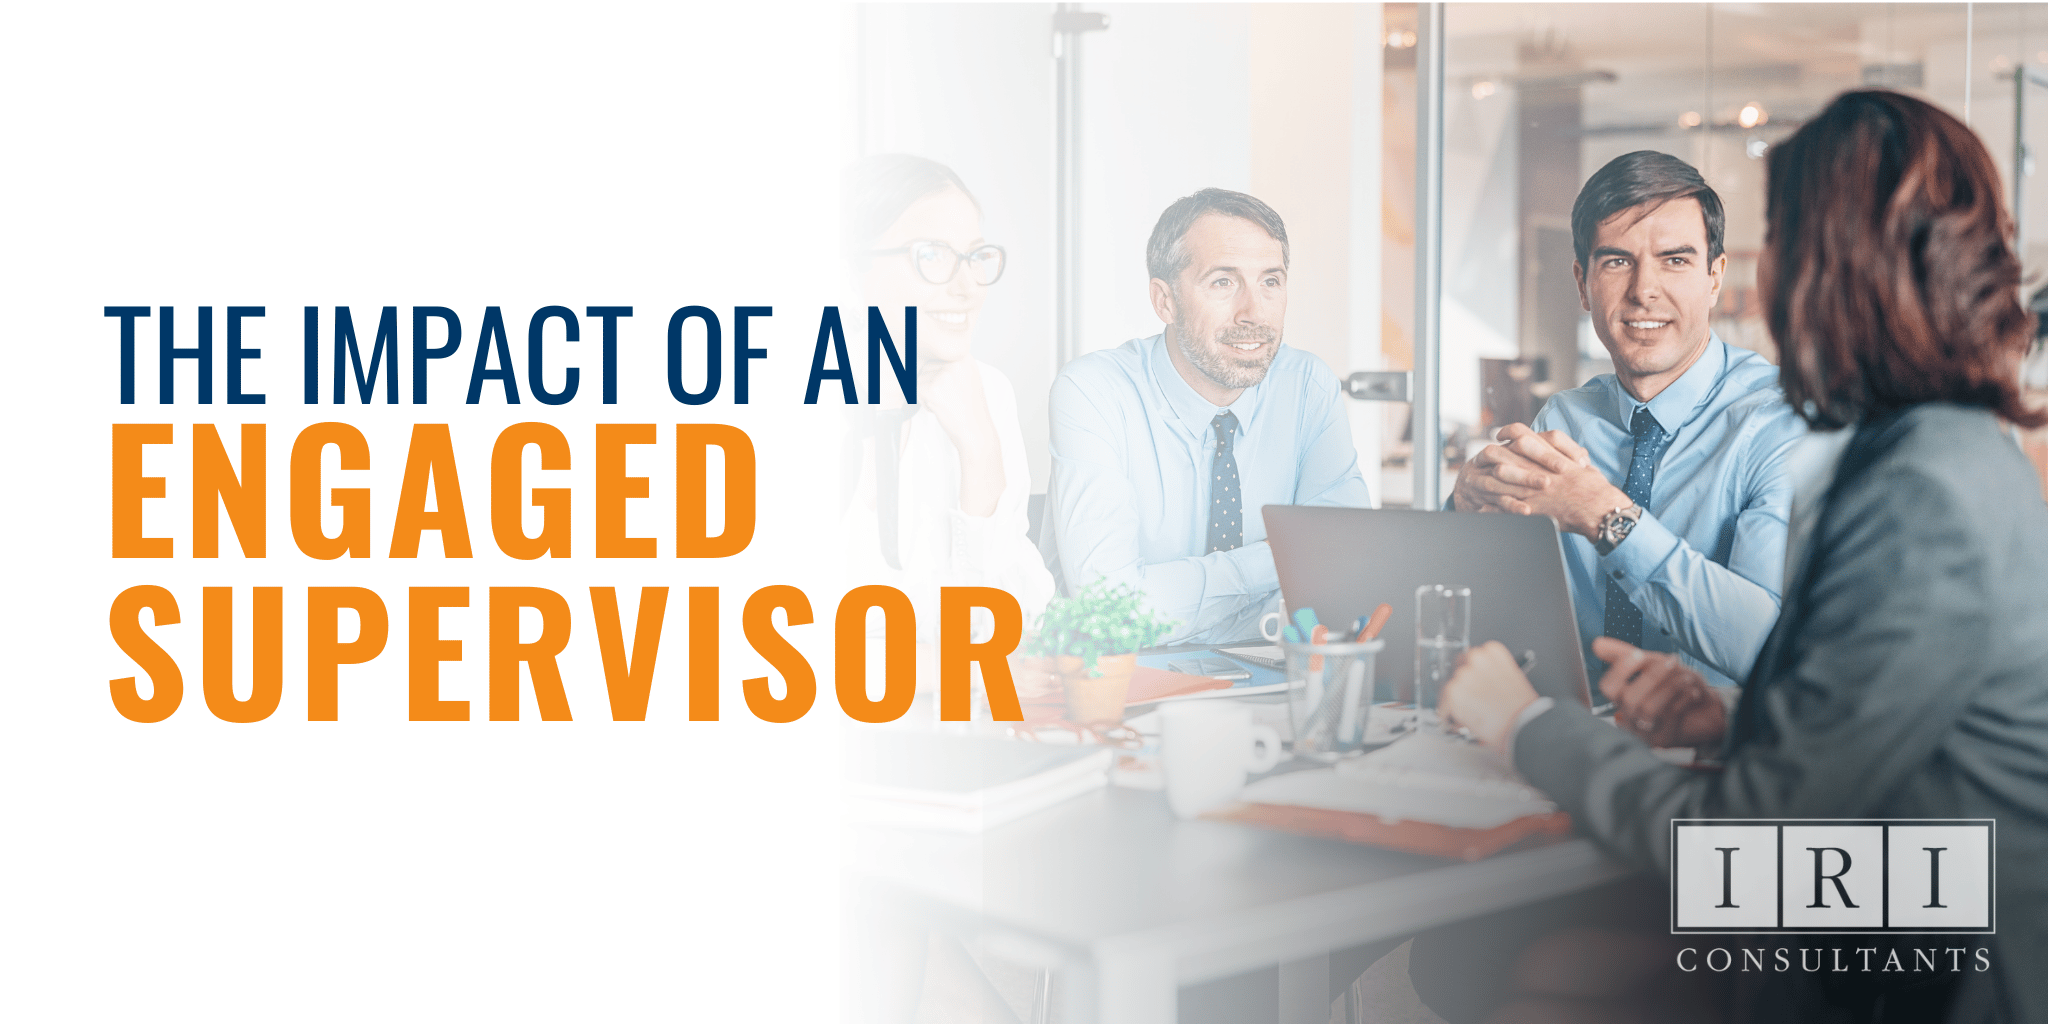 The Impact of an Engaged Supervisor